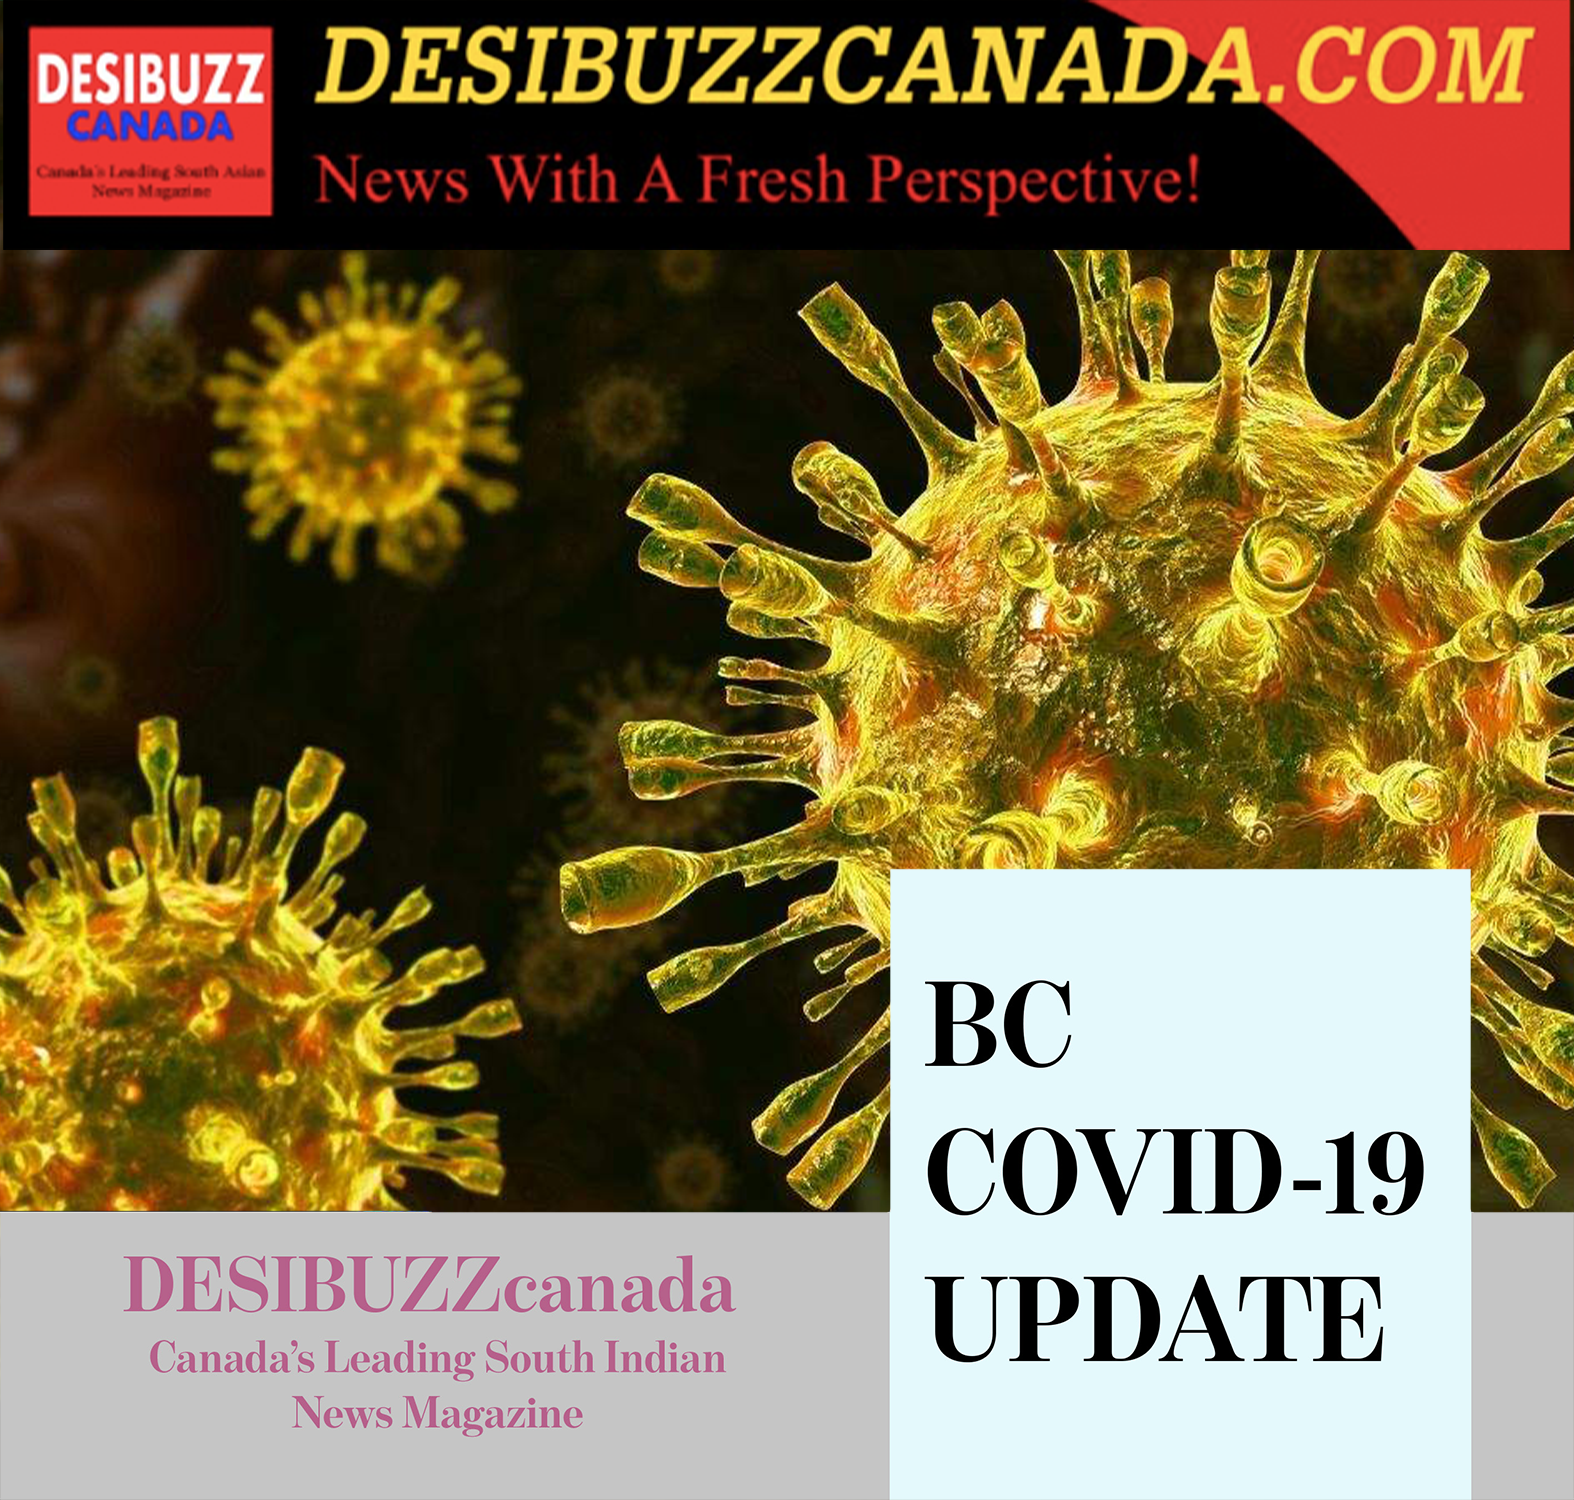 BC COVID-19 UPDATE: Over 200 Cases And One Death Reported Tuesday As Hospitalizations Continue To Slide